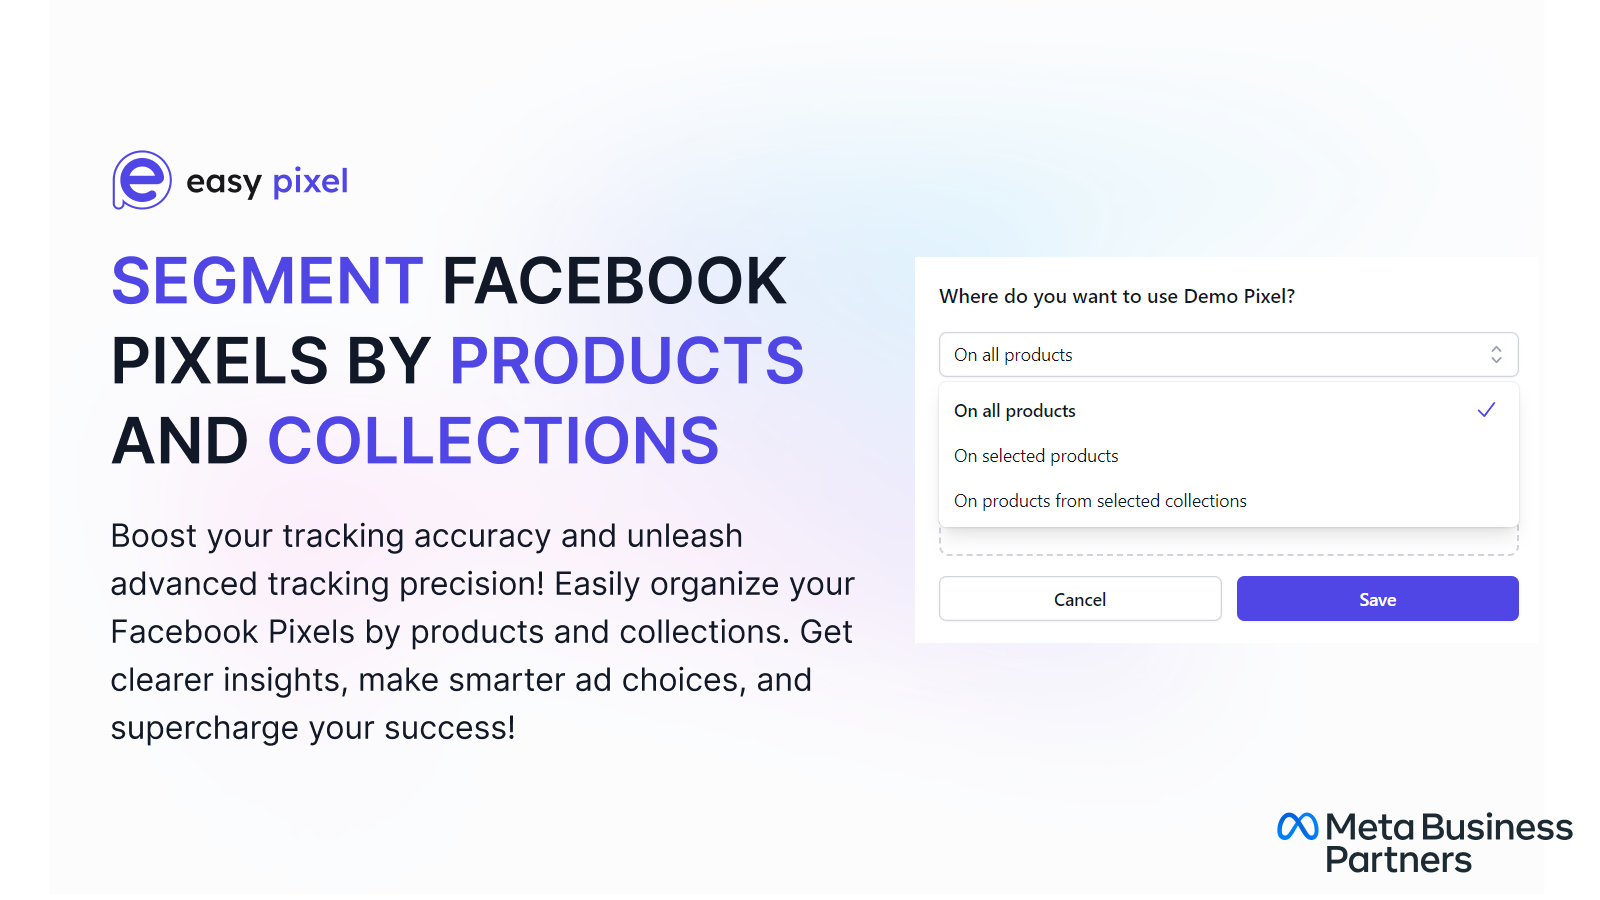 Segment Facebook Pixels by Products and Collections